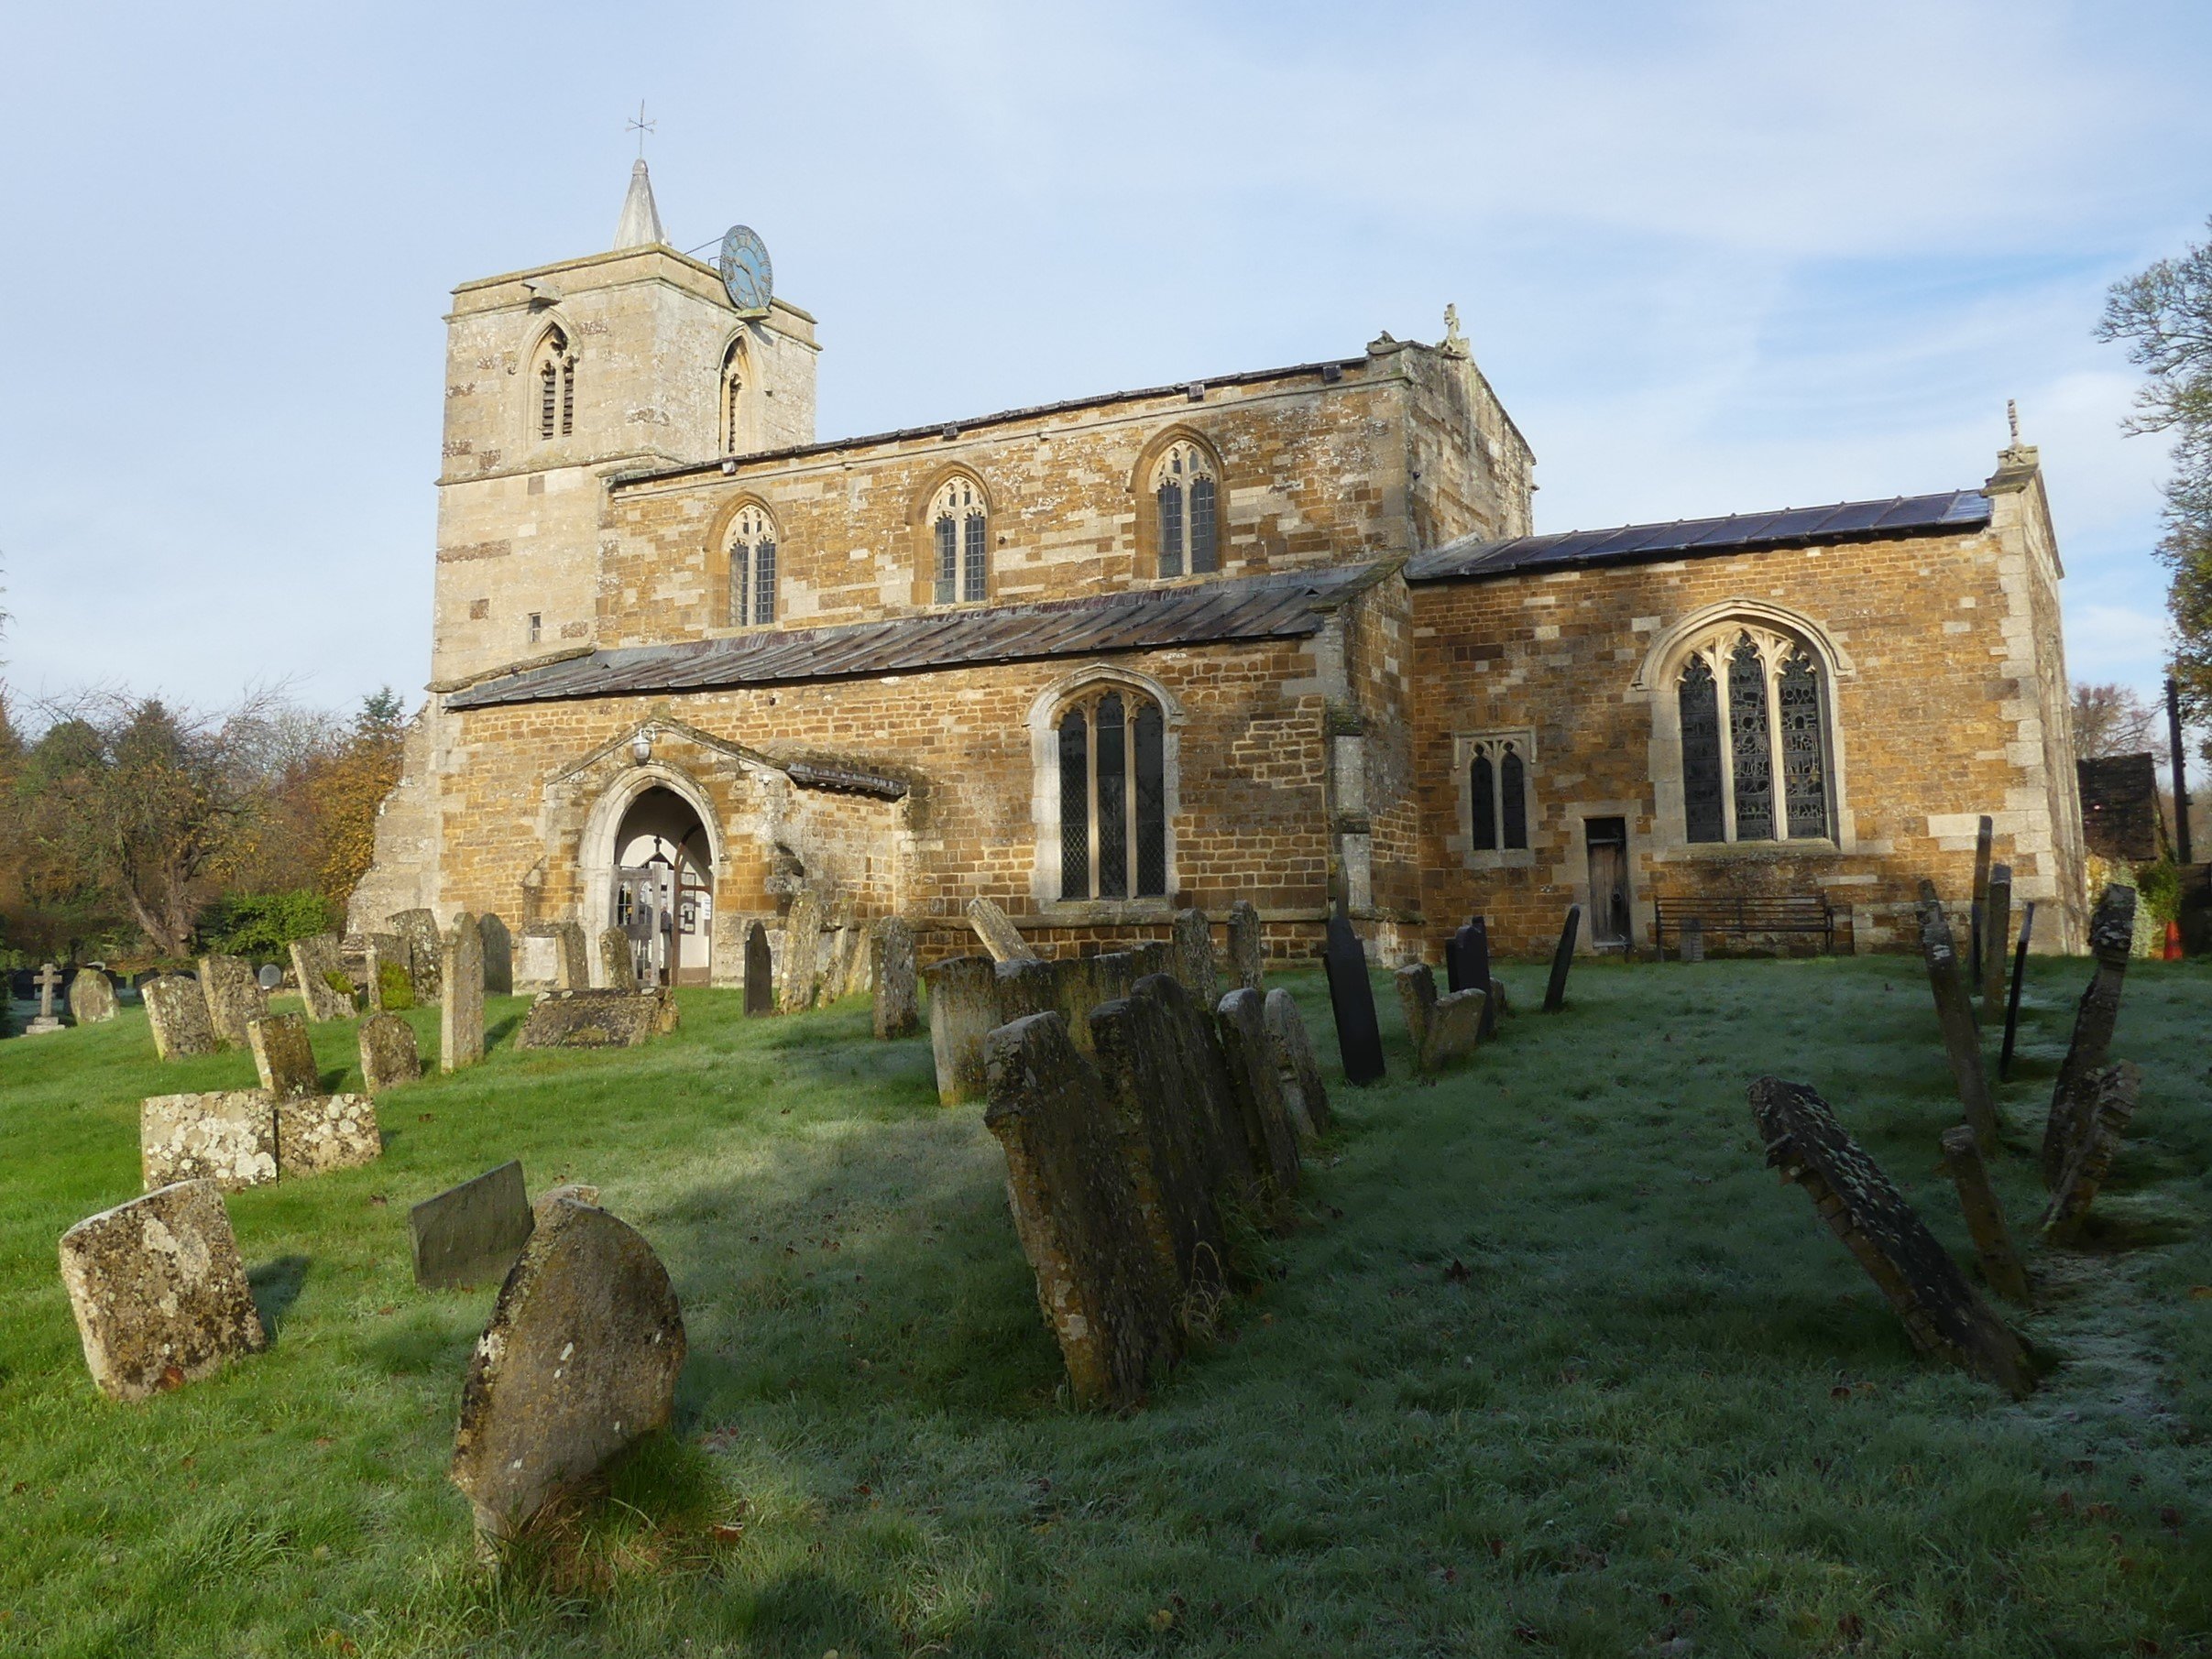 Image shows the church of All Saints in Braunston-in-Rutland